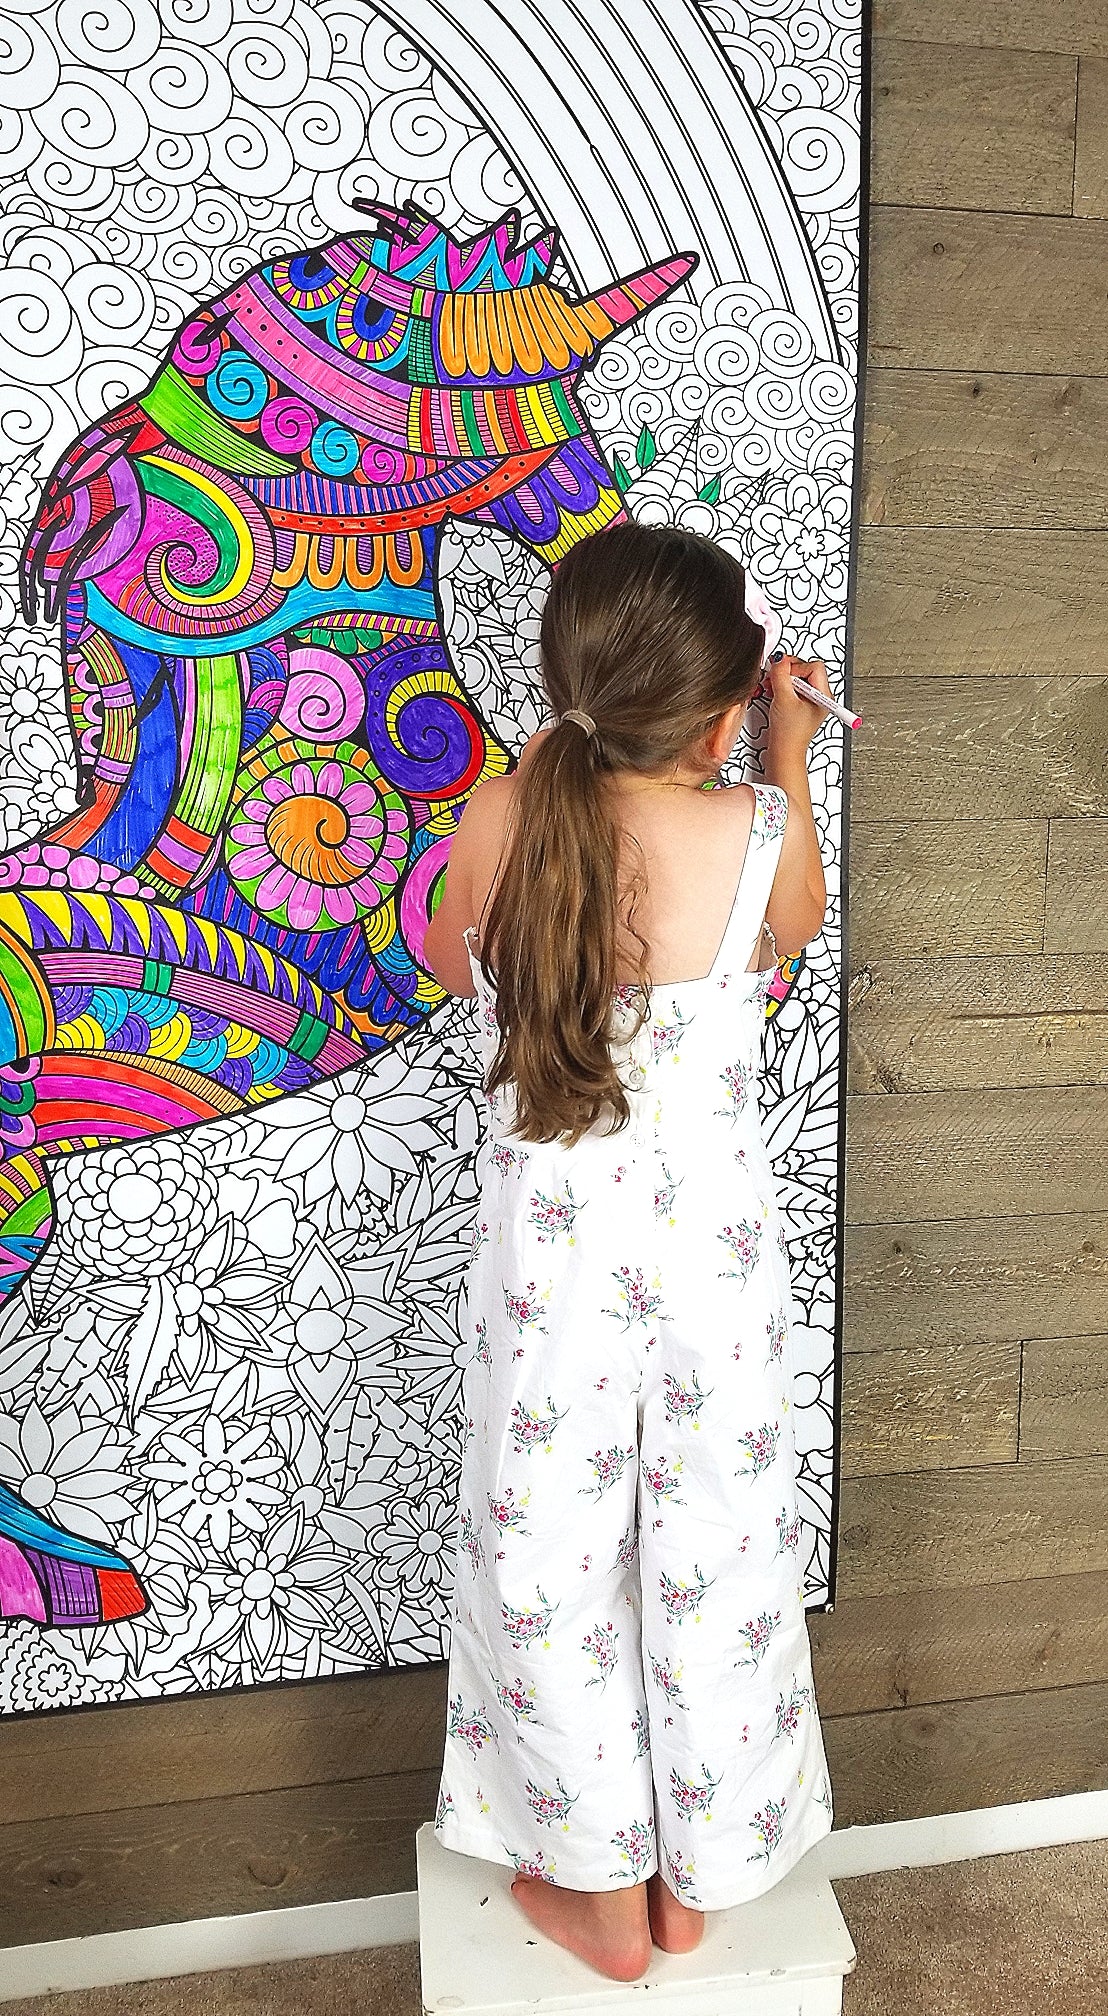 Unicorn Personalized Giant Coloring Poster 46"x60"